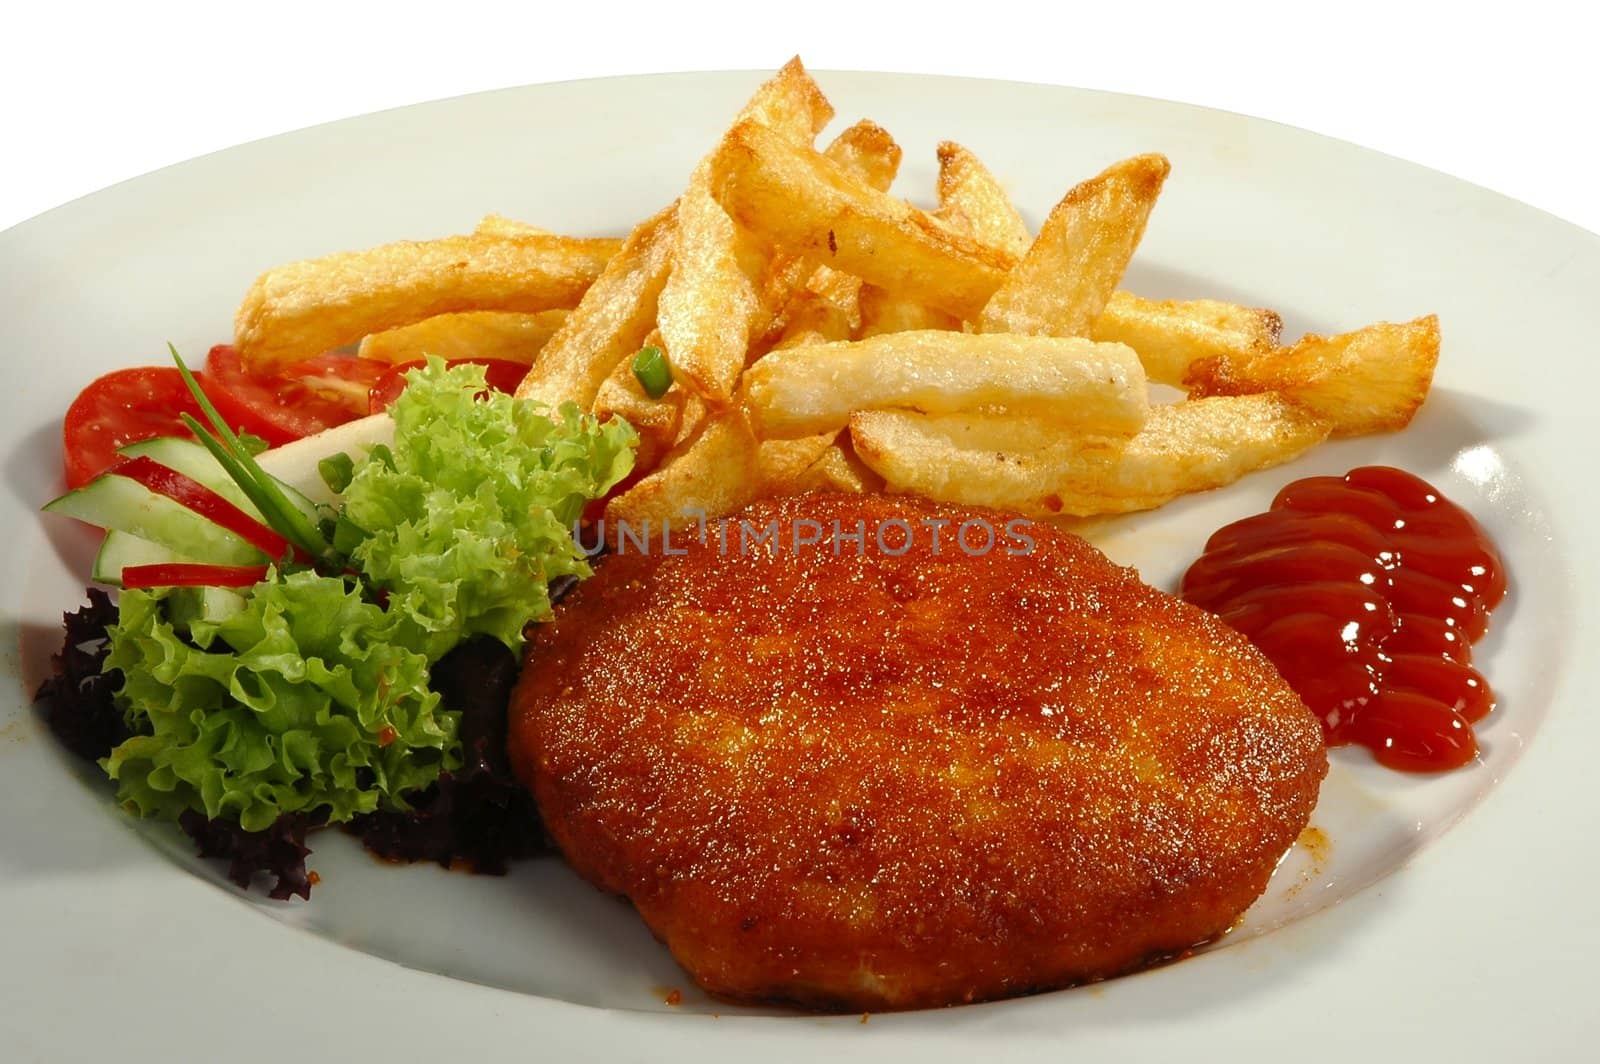 friture potatos, cutlet, tomamo, cucumber, salad and sauce on white plate